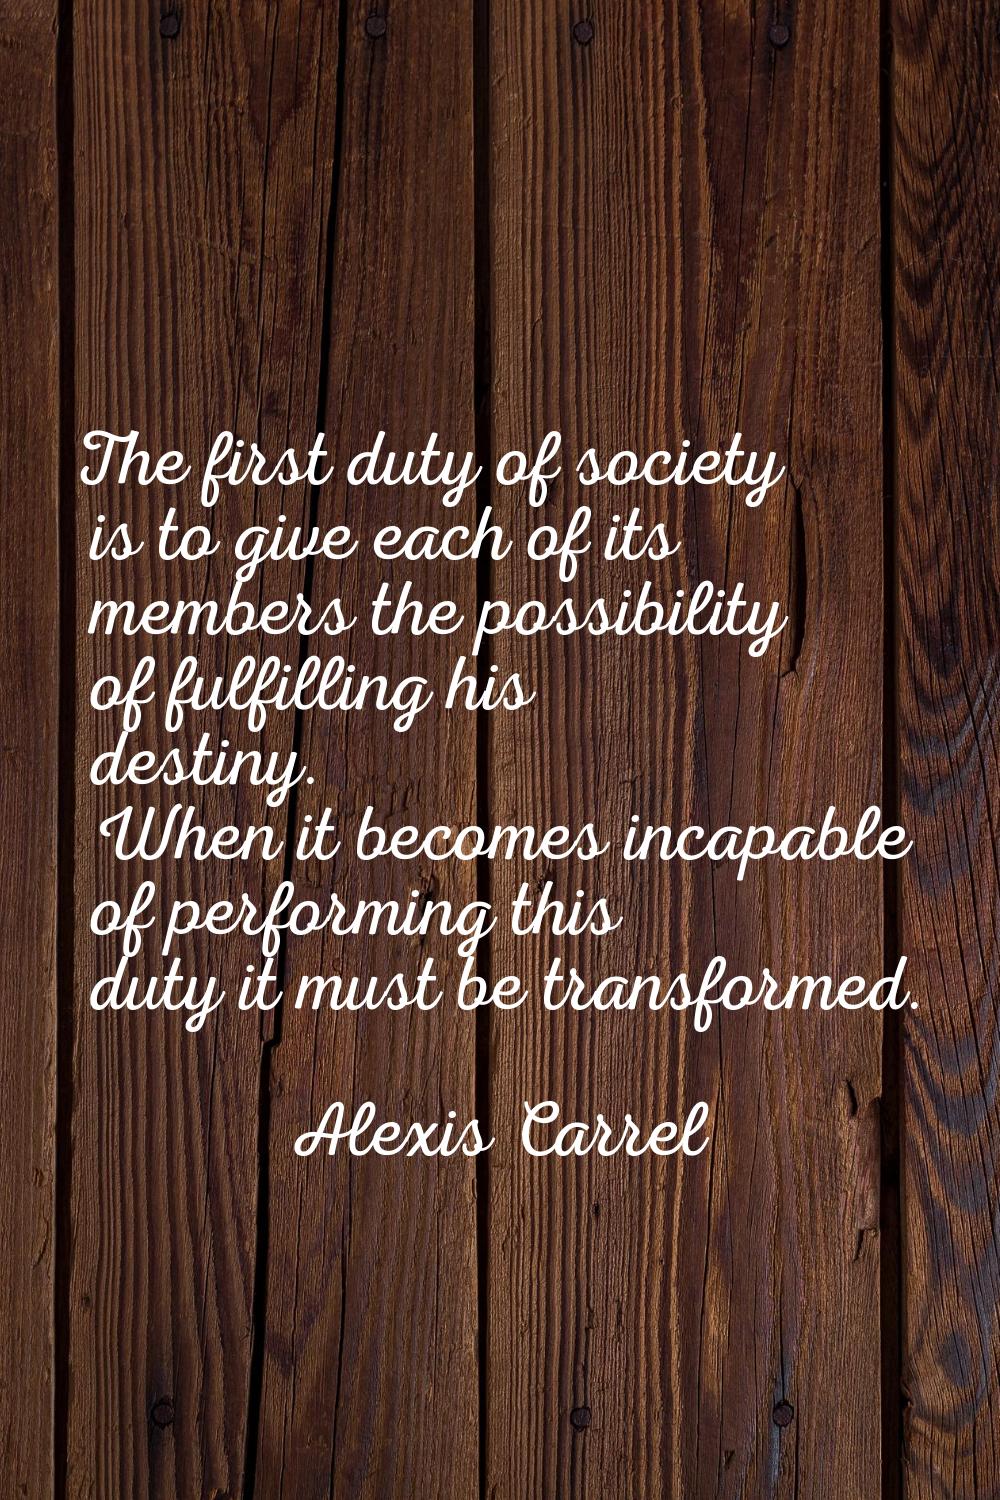 The first duty of society is to give each of its members the possibility of fulfilling his destiny.